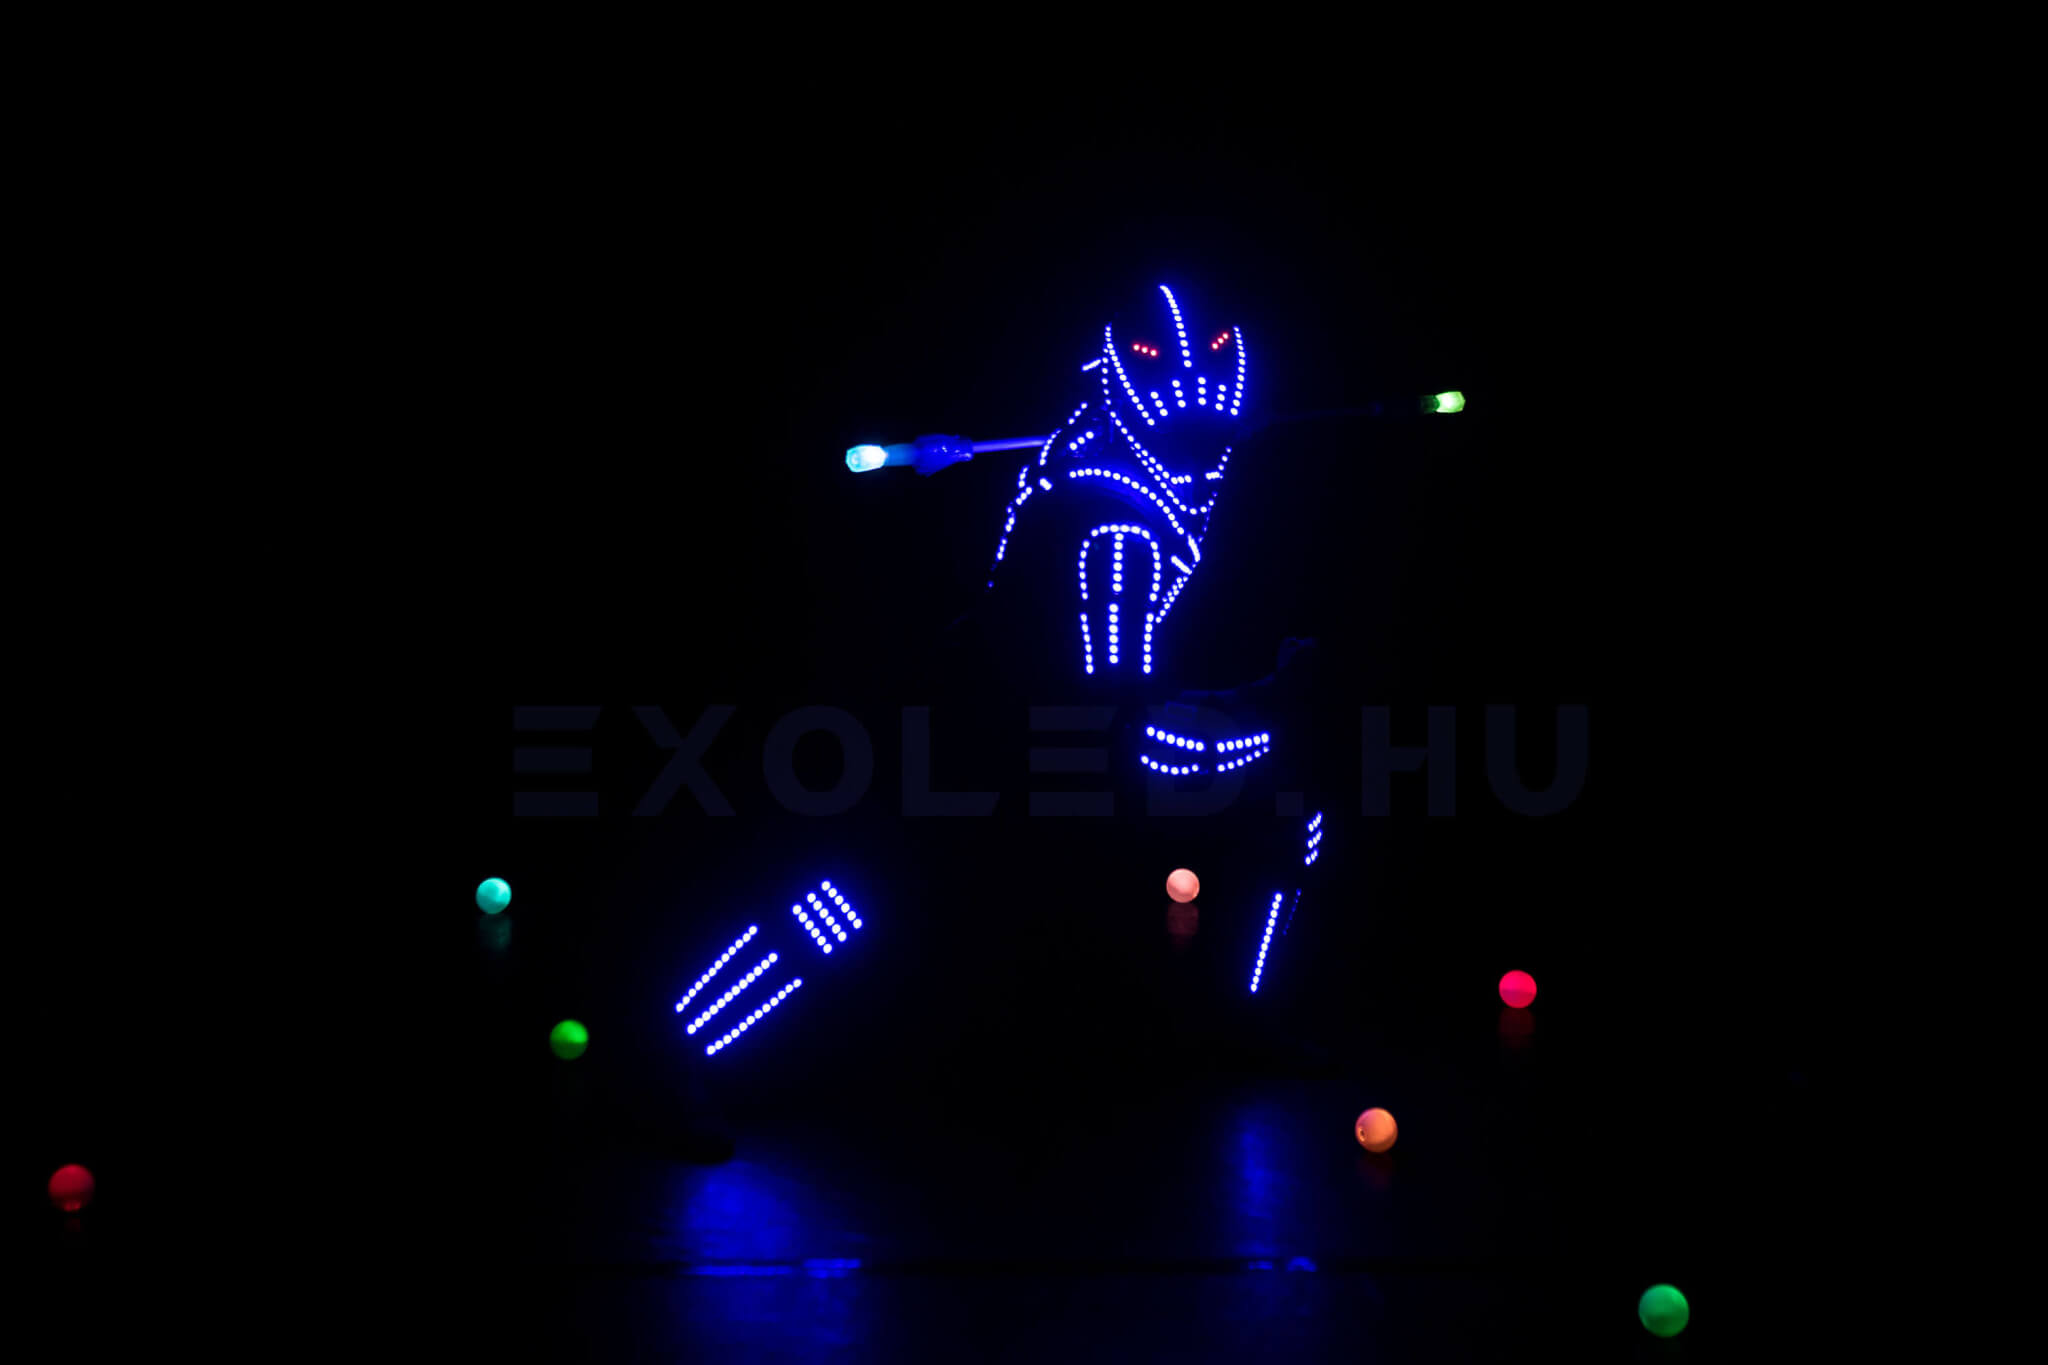 exoled_led_zsonglor_project_11